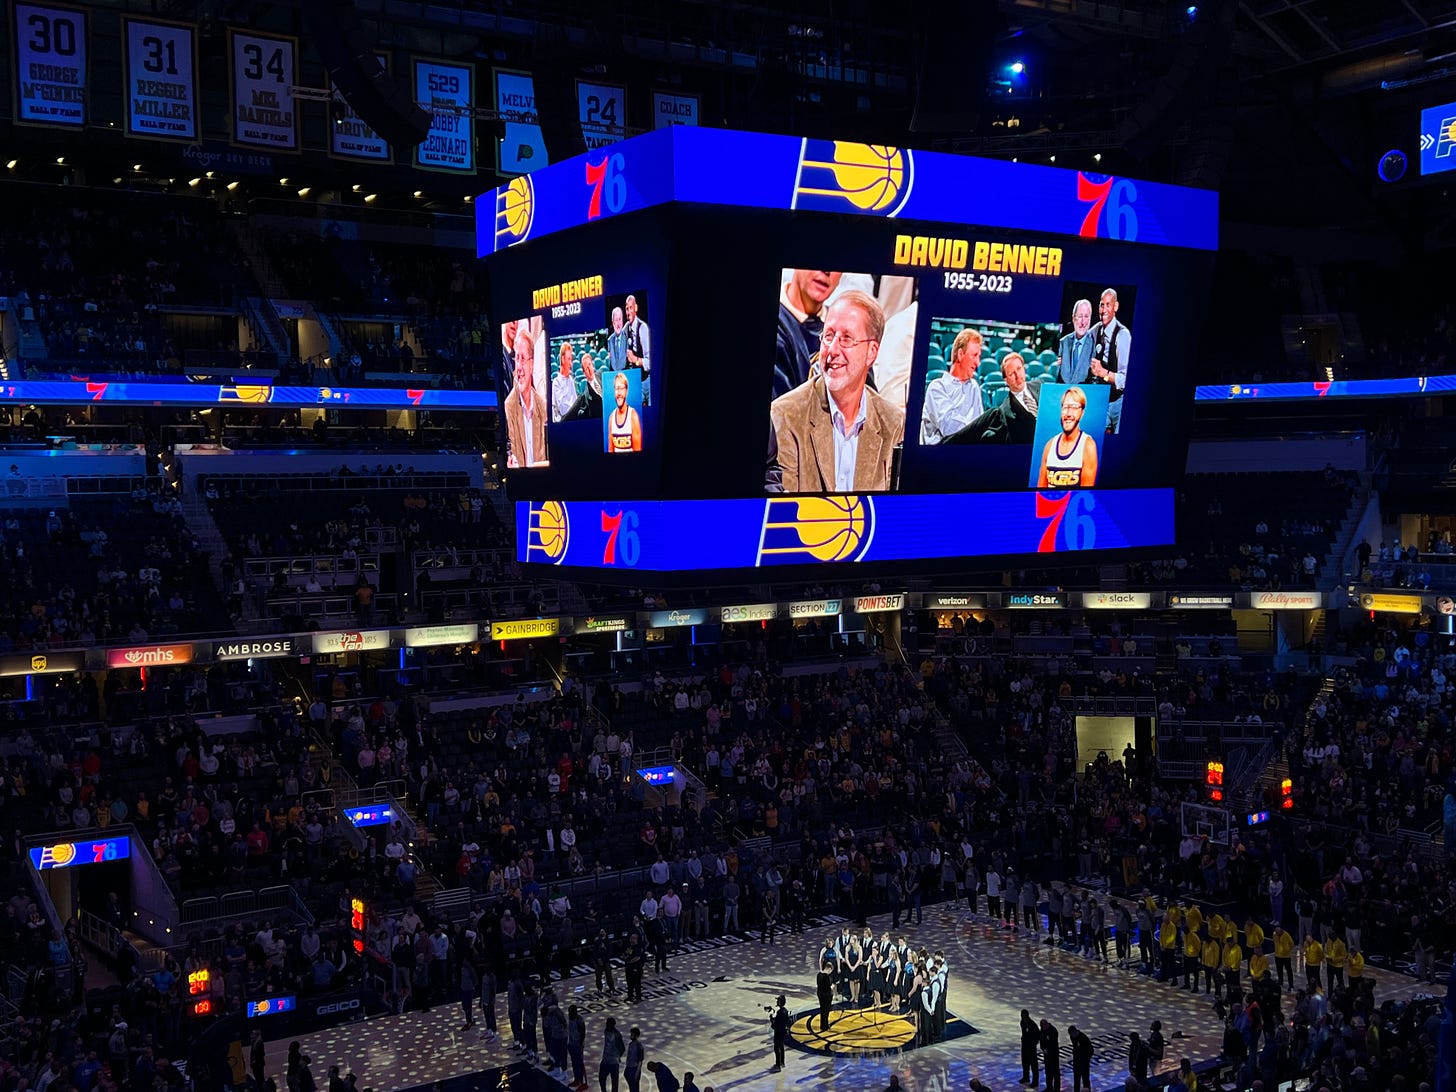 The Pacers held a moment of silence on March 6, their first home game since the passing of longtime PR director David Benner.